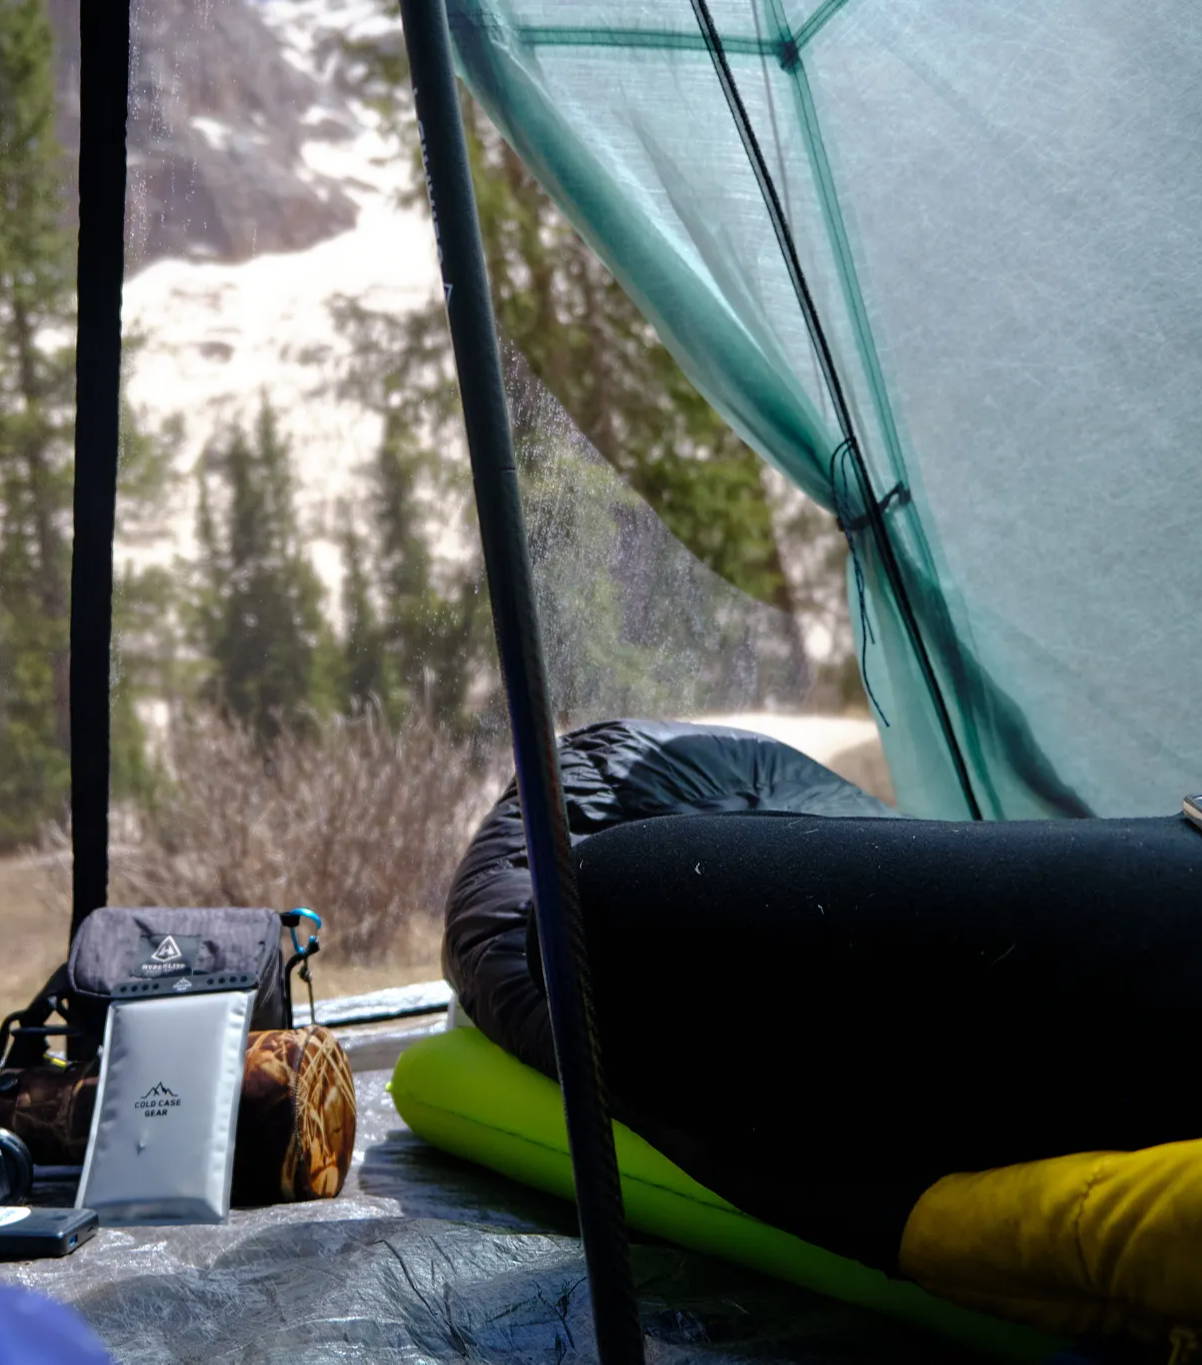 A tent is another backpacking item where renting can be useful.